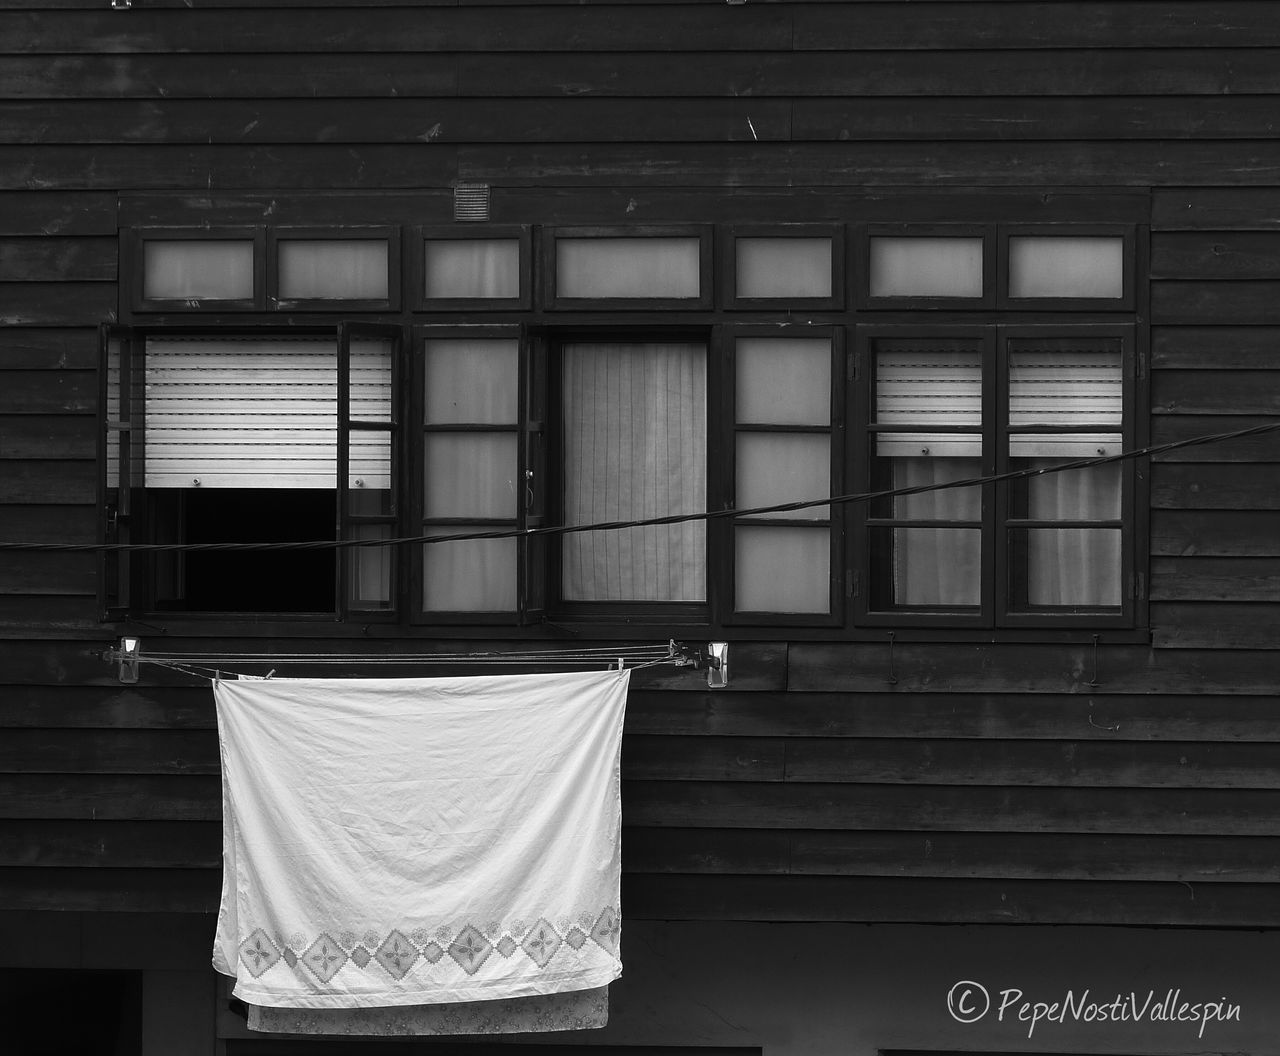 window, built structure, shutter, no people, architecture, day, indoors, building exterior, laundry